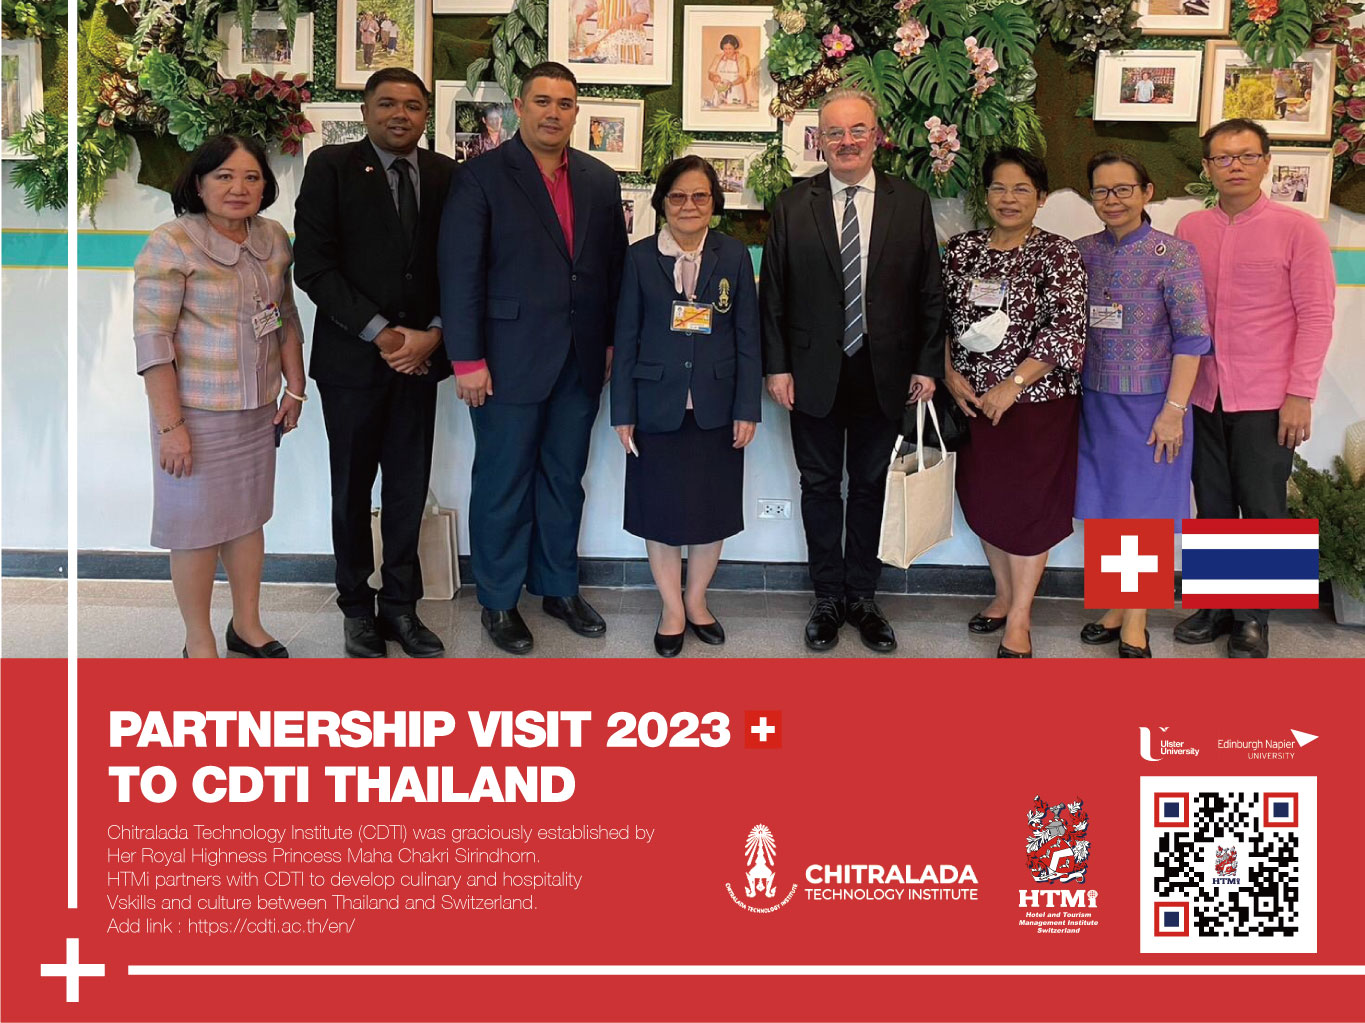 Chitralada Technology Institute (CDT) was graciously established by Her Royal Highness Princess Maha Chakri Sirindhorn. HTMi partners with CDTI to develop culinary and hospitality skills and culture between Thailand and Switzerland.